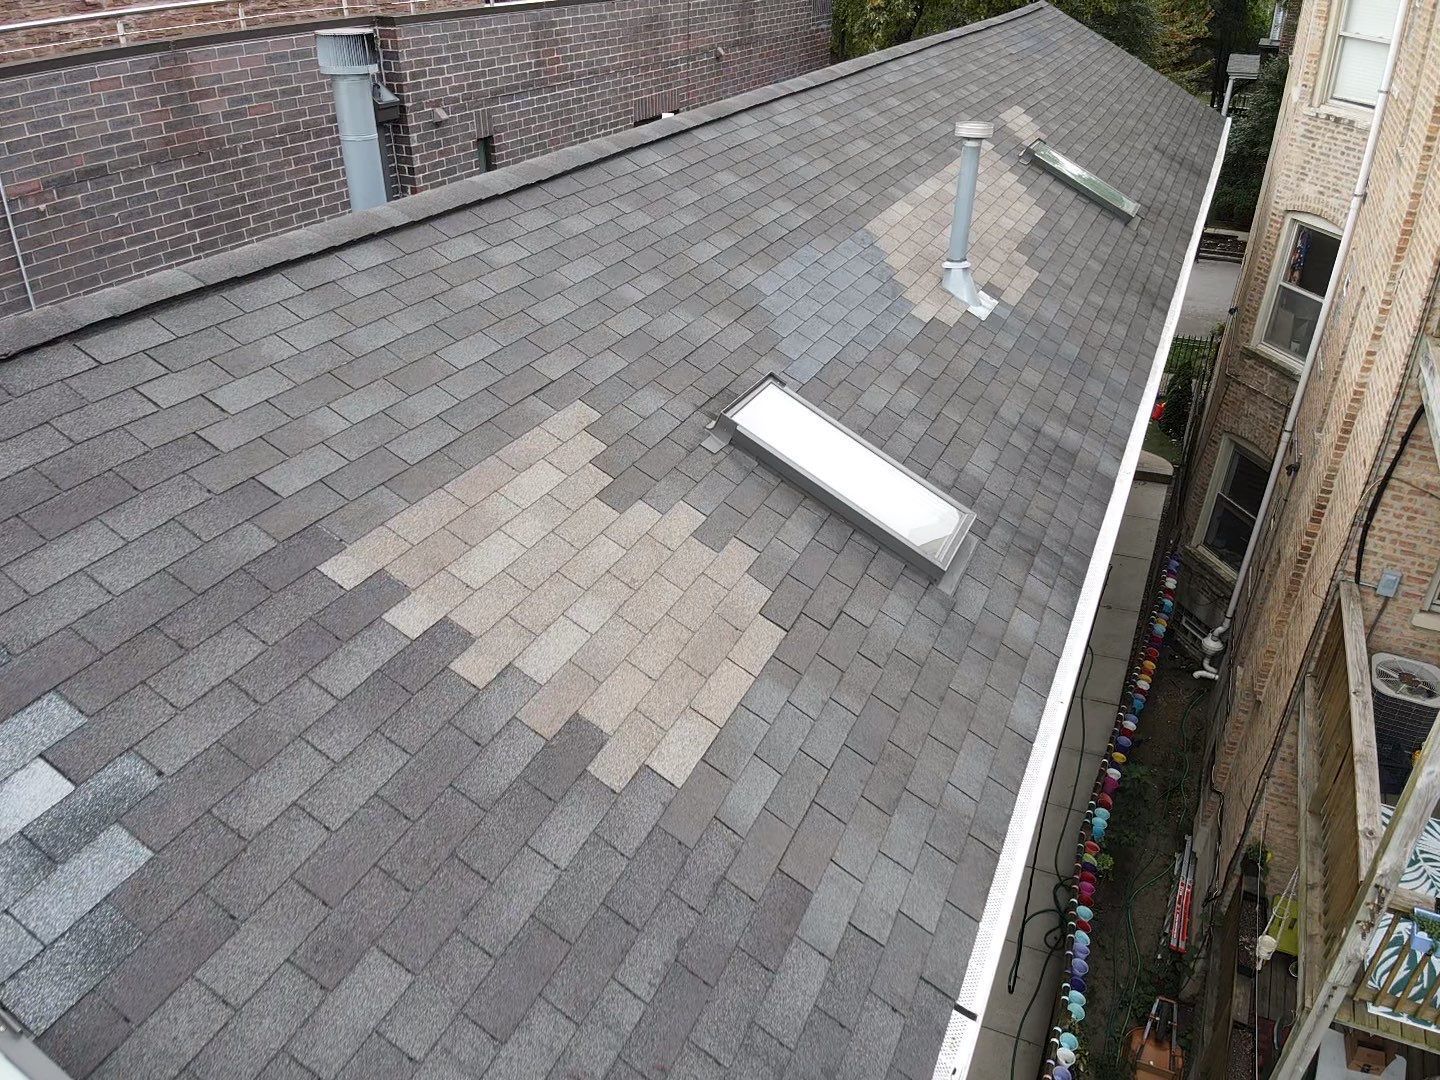 An aerial view of a roof with shingles missing and a skylight.